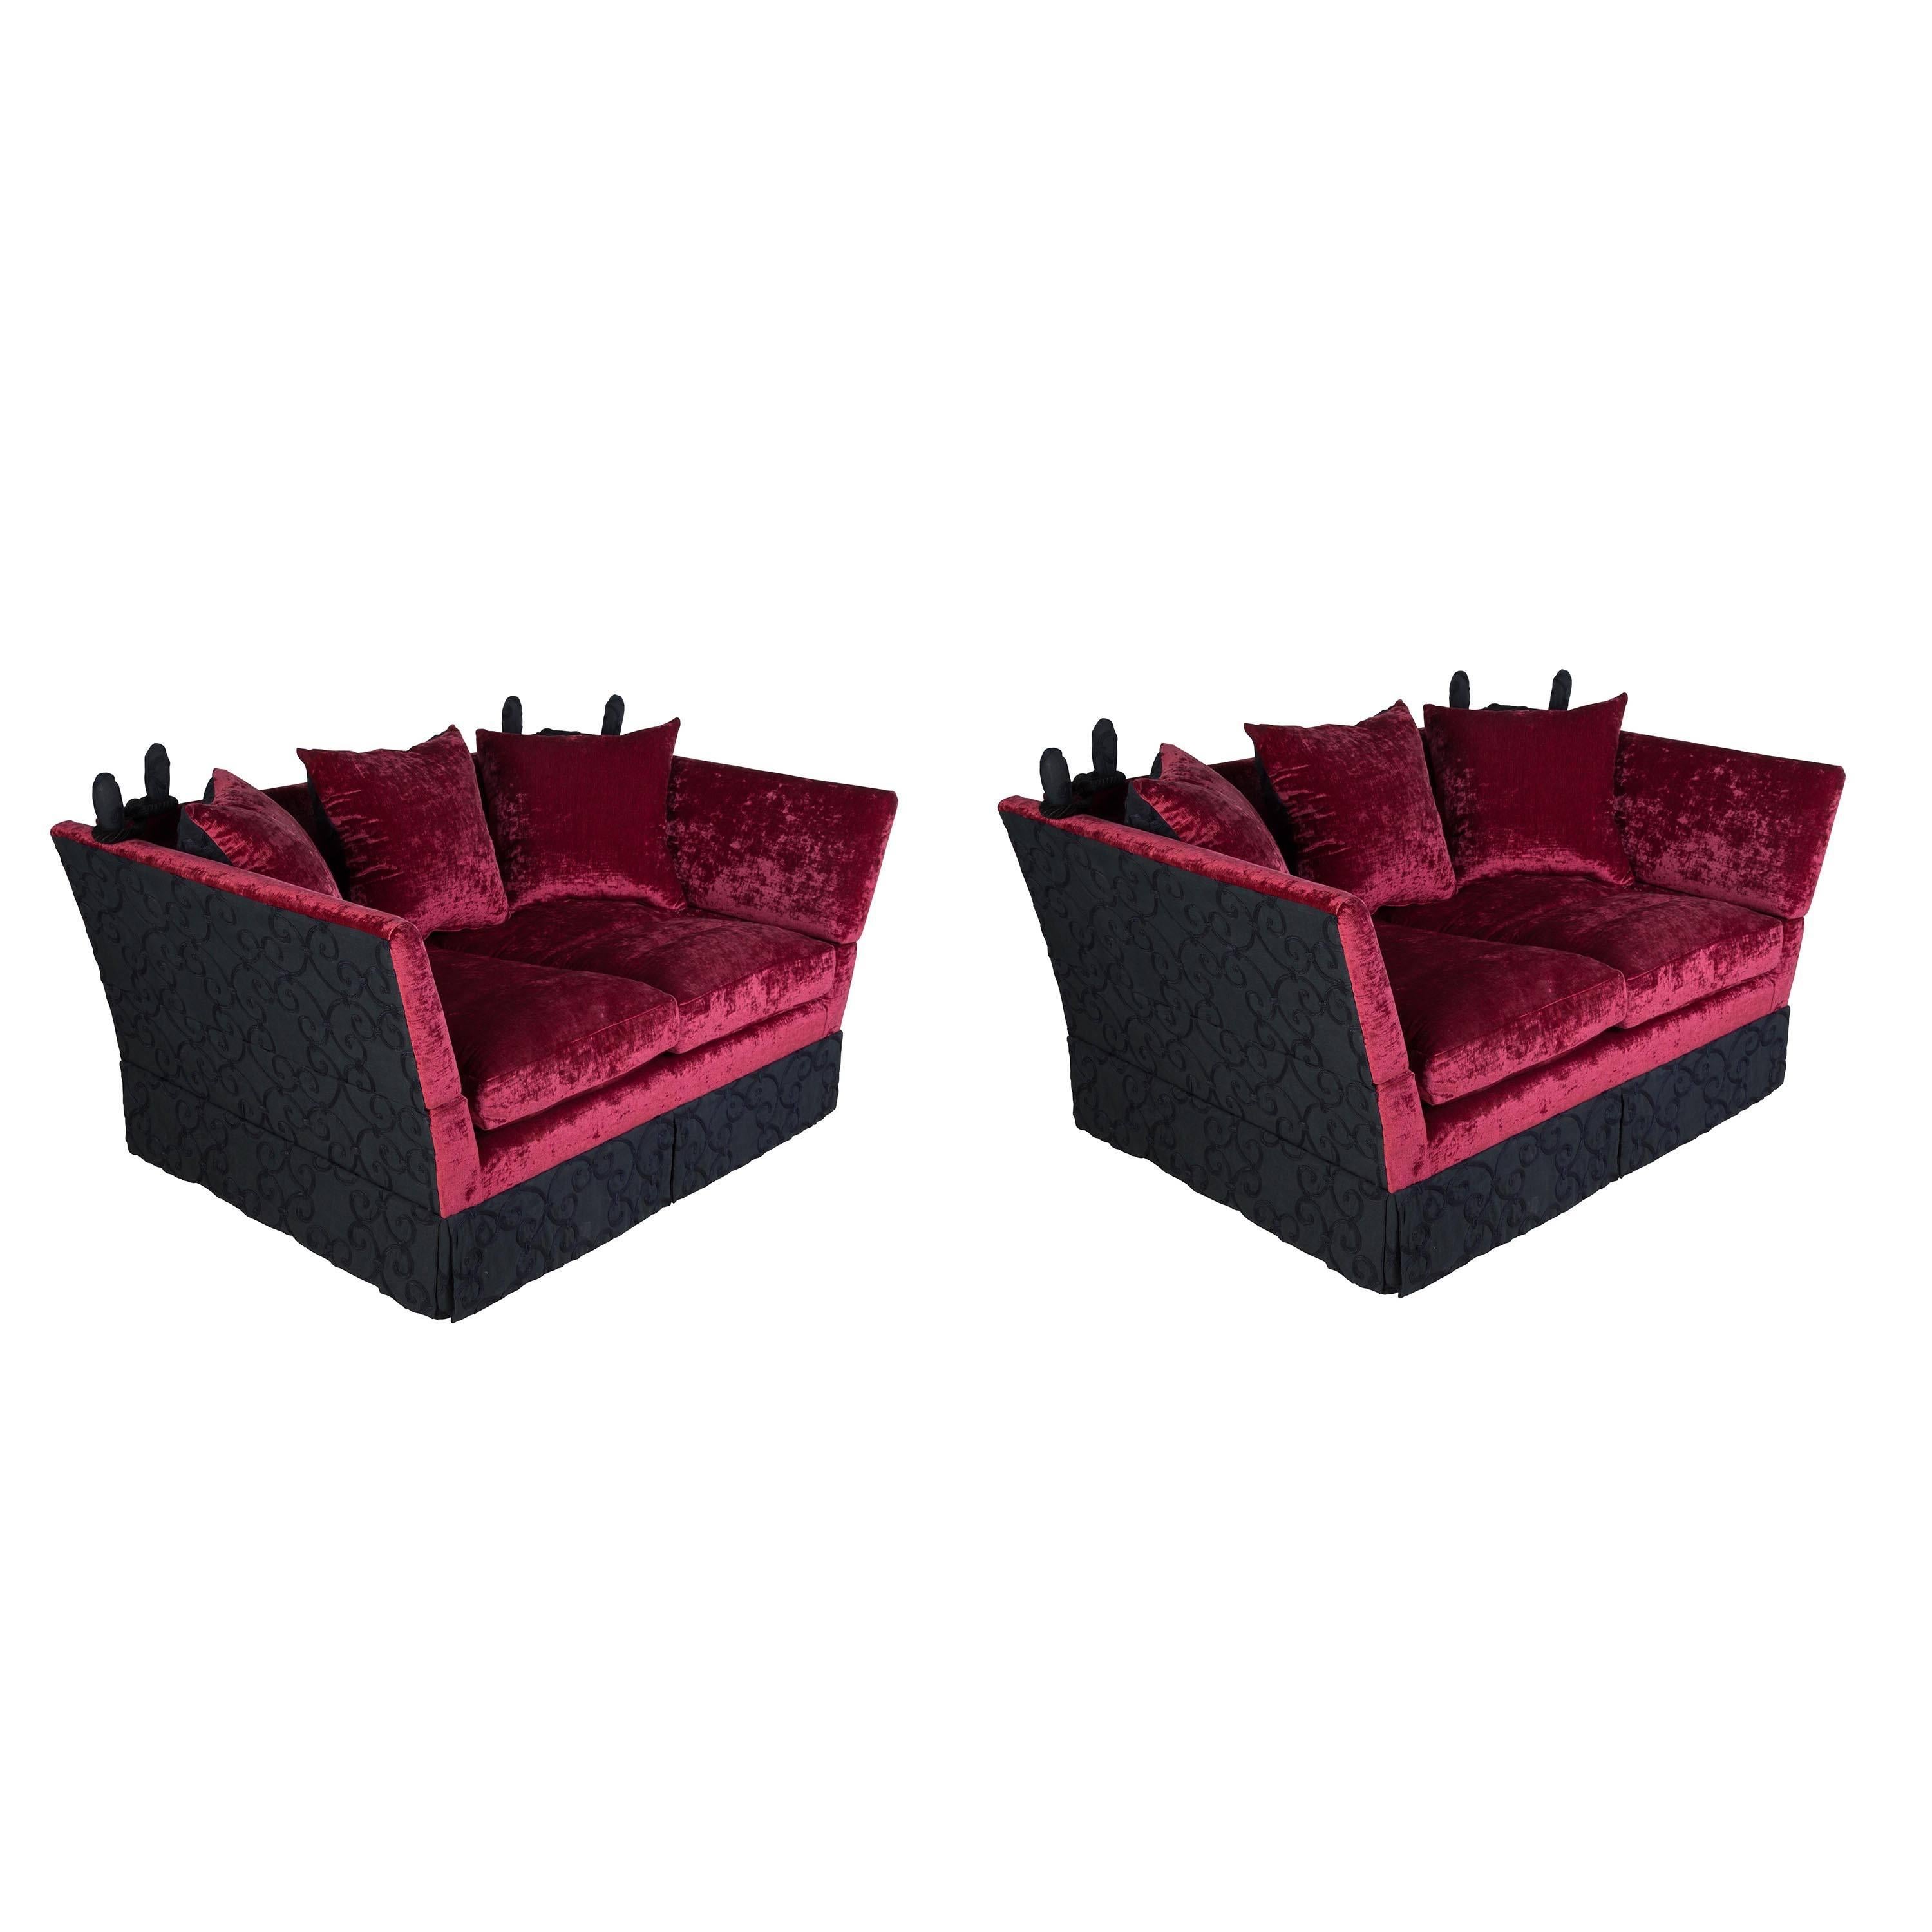 A pair of 1960s Knole sofas luxuriously recovered in velvet and embroidered linen.